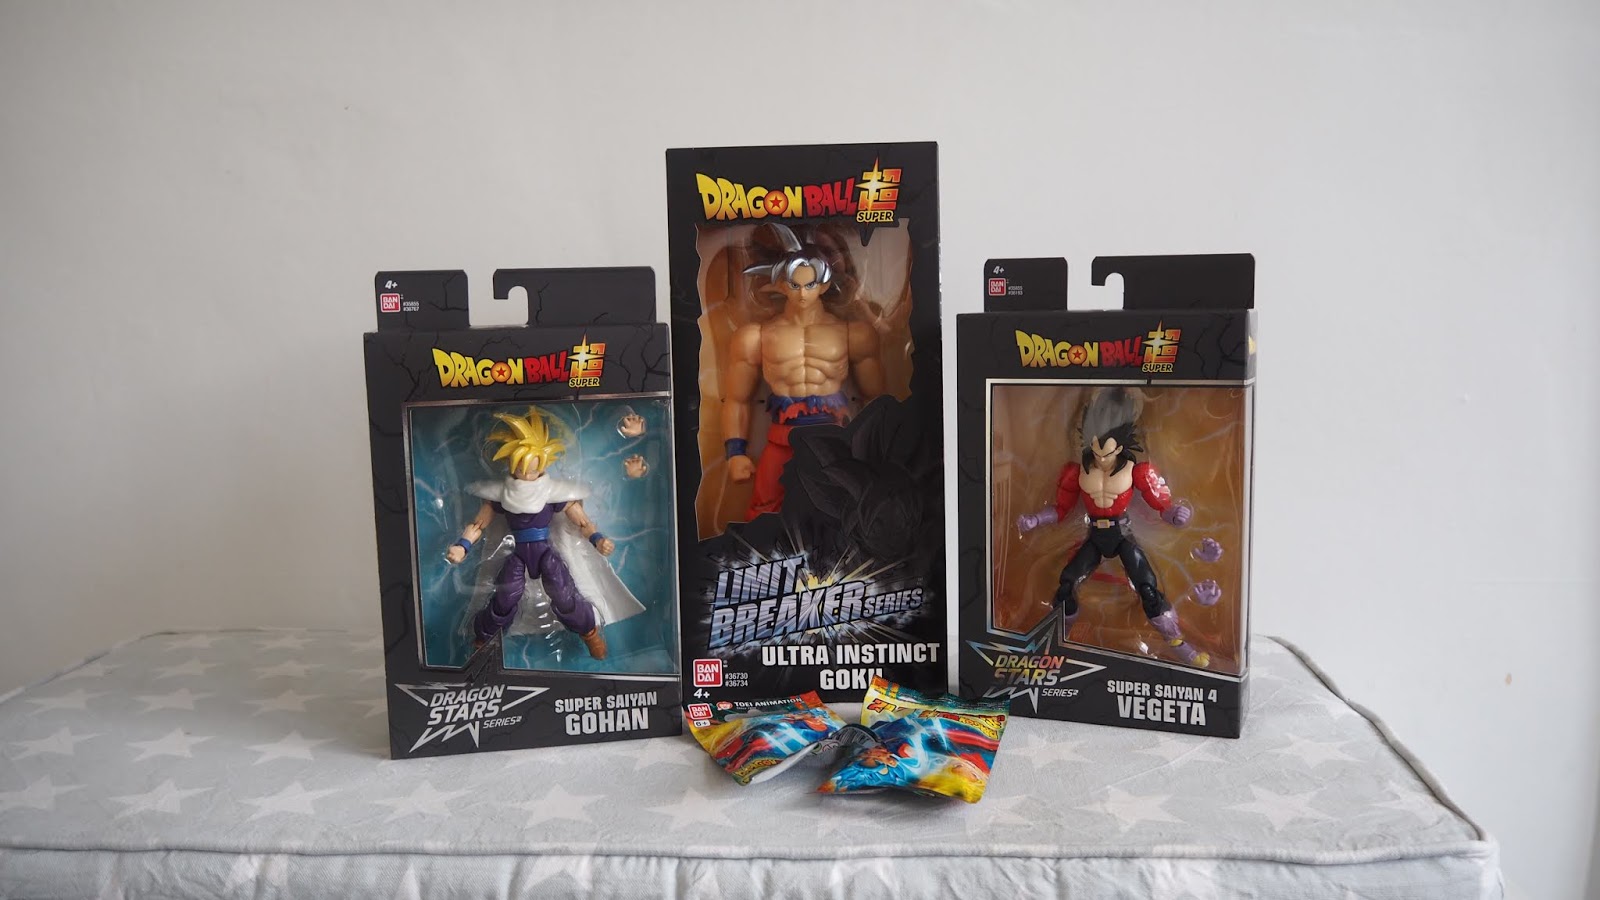 Chic Geek Diary: Dragon Ball Toys from Bandai - Review